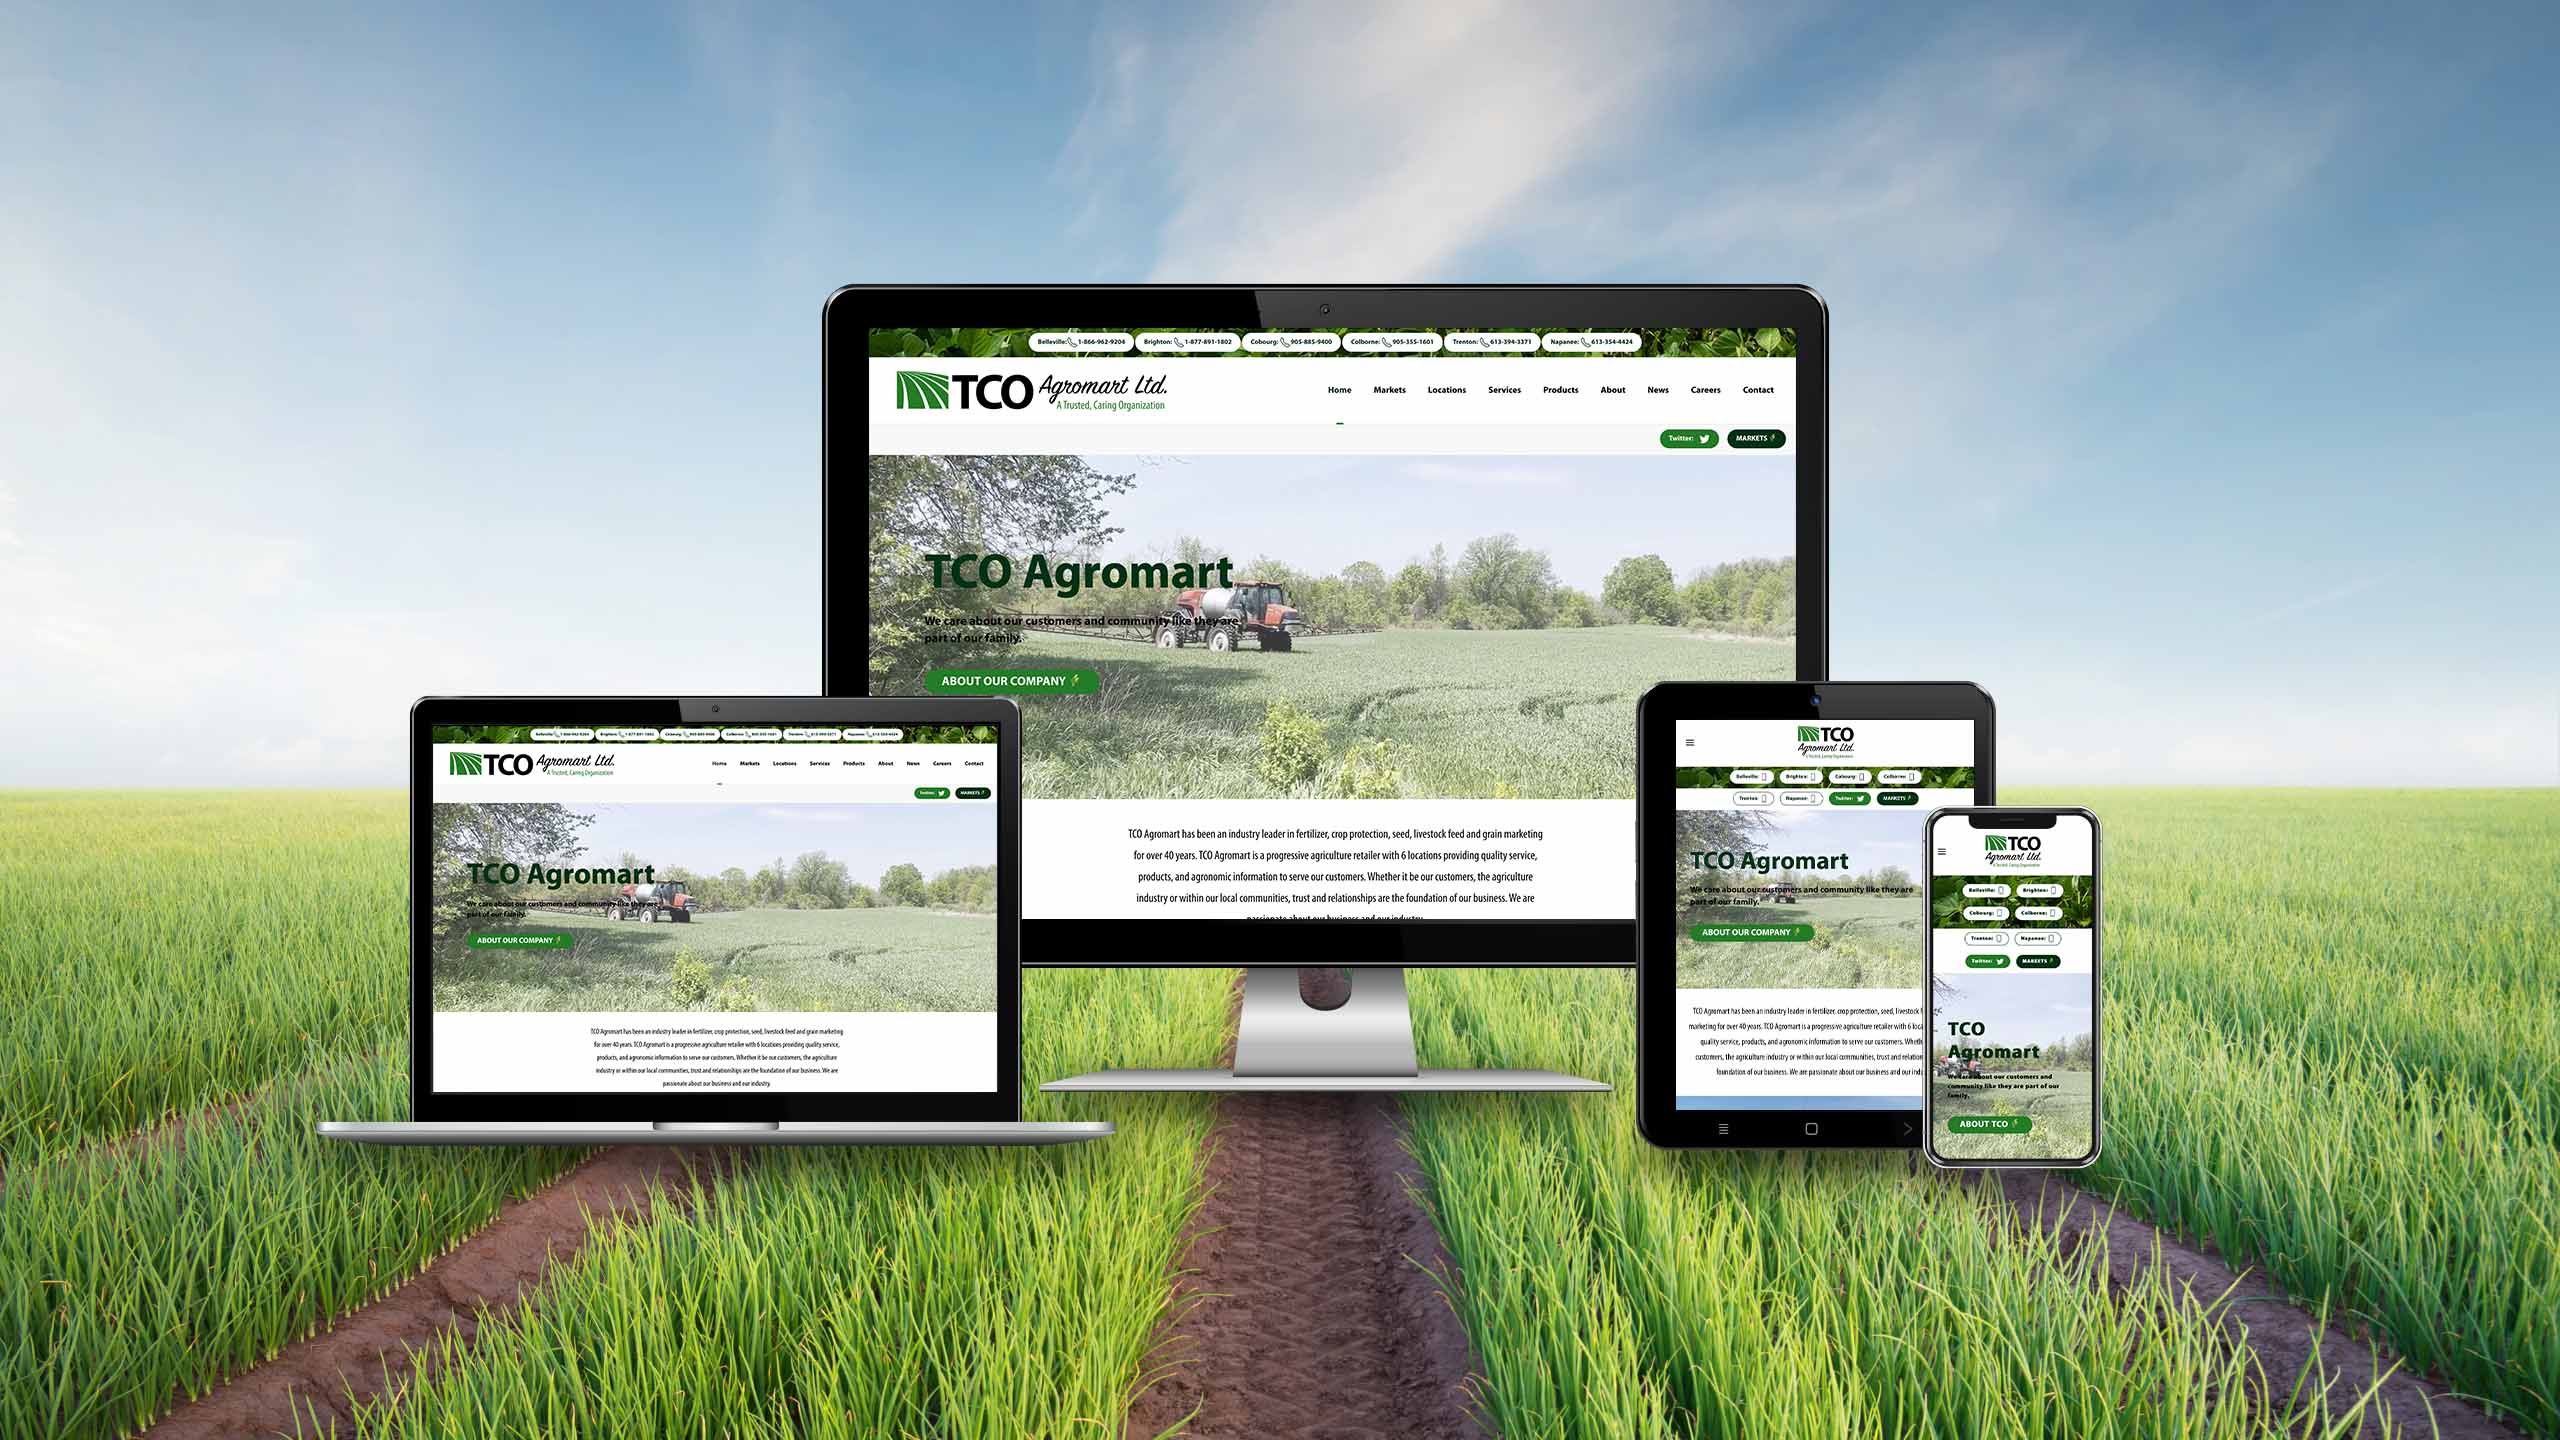 TCO Agromart website responsive views with farmland in the background green grass and blue skies